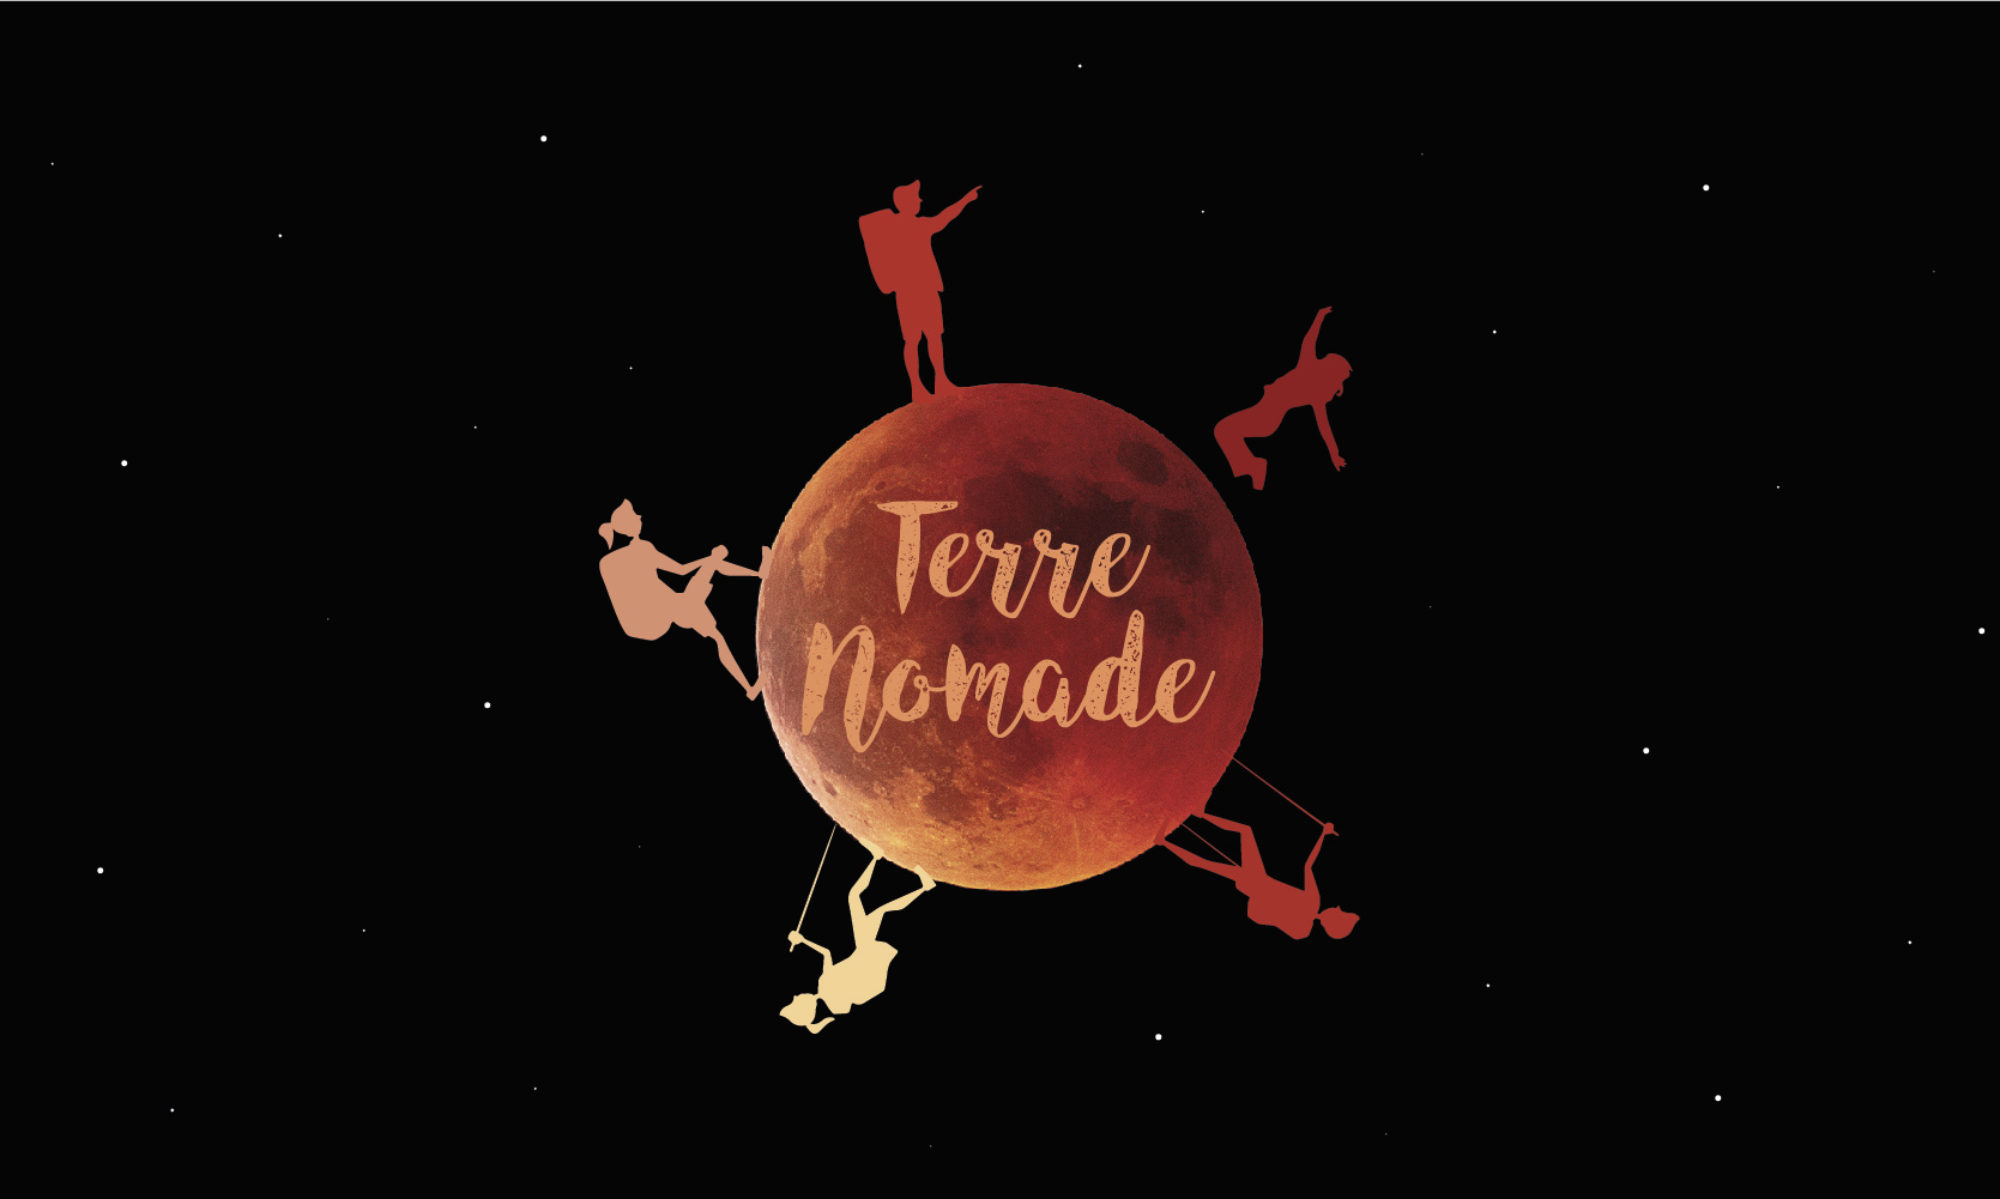 Terre Nomade